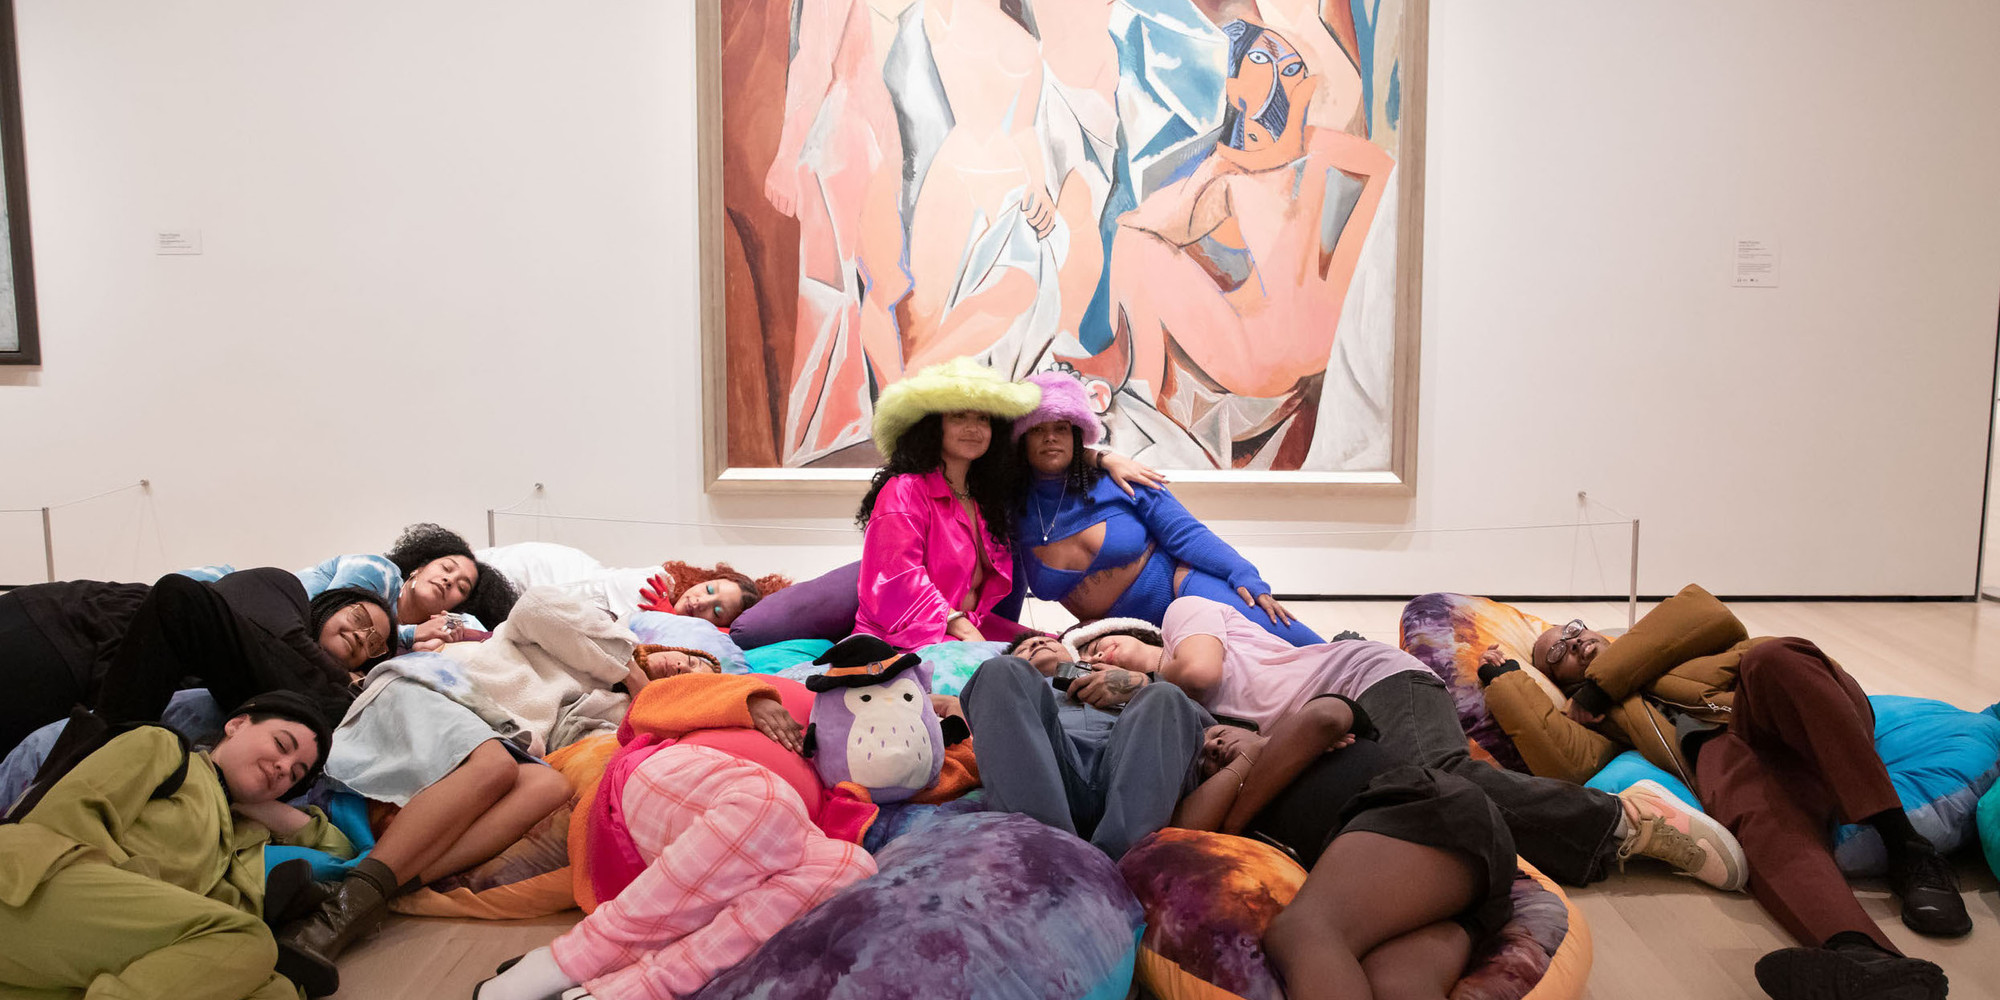 Nap Night with Black Power Naps, The Museum of Modern Art, New York, January 20, 2023. Photo: Julieta Cervantes. Digital image © 2023 The Museum of Modern Art. Shown: Pablo Picasso. Les Demoiselles d’Avignon. 1907. Oil on canvas, 8&#39; × 7&#39; 8&#34; (243.9 × 233.7 cm). The Museum of Modern Art, New York. Acquired through the Lillie P. Bliss Bequest (by exchange). © 2023 Estate of Pablo Picasso/Artists Rights Society (ARS), New York